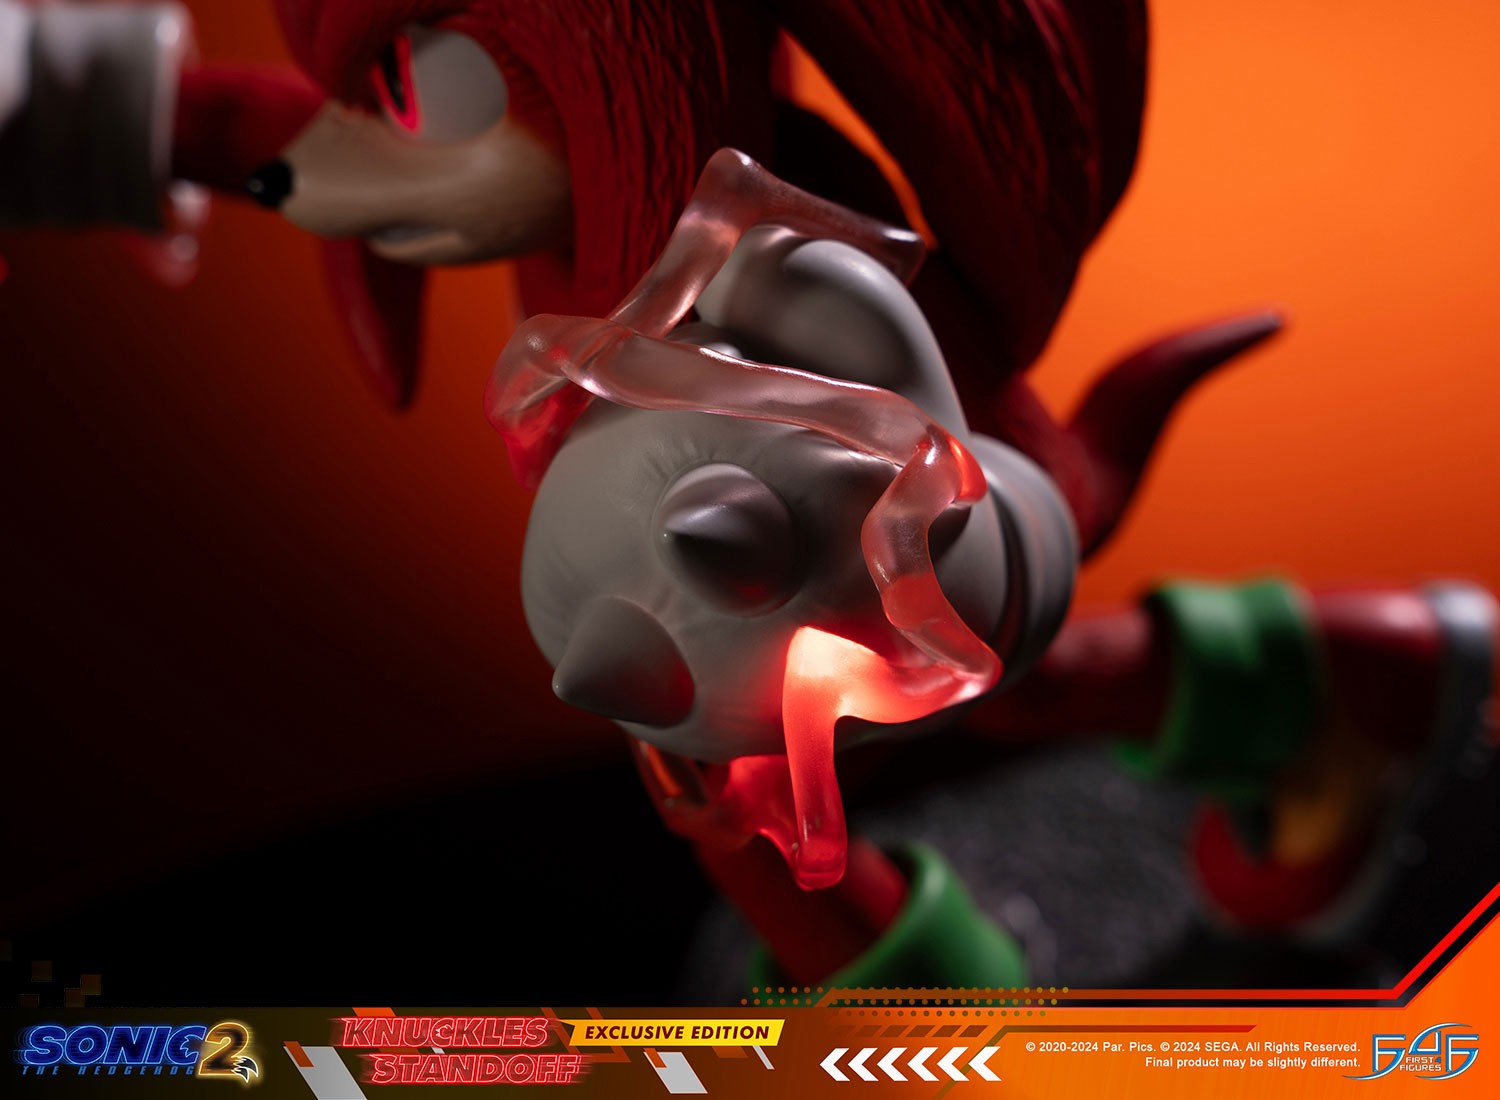 Sonic the Hedgehog 2 - Knuckles Standoff (Exclusive Edition)